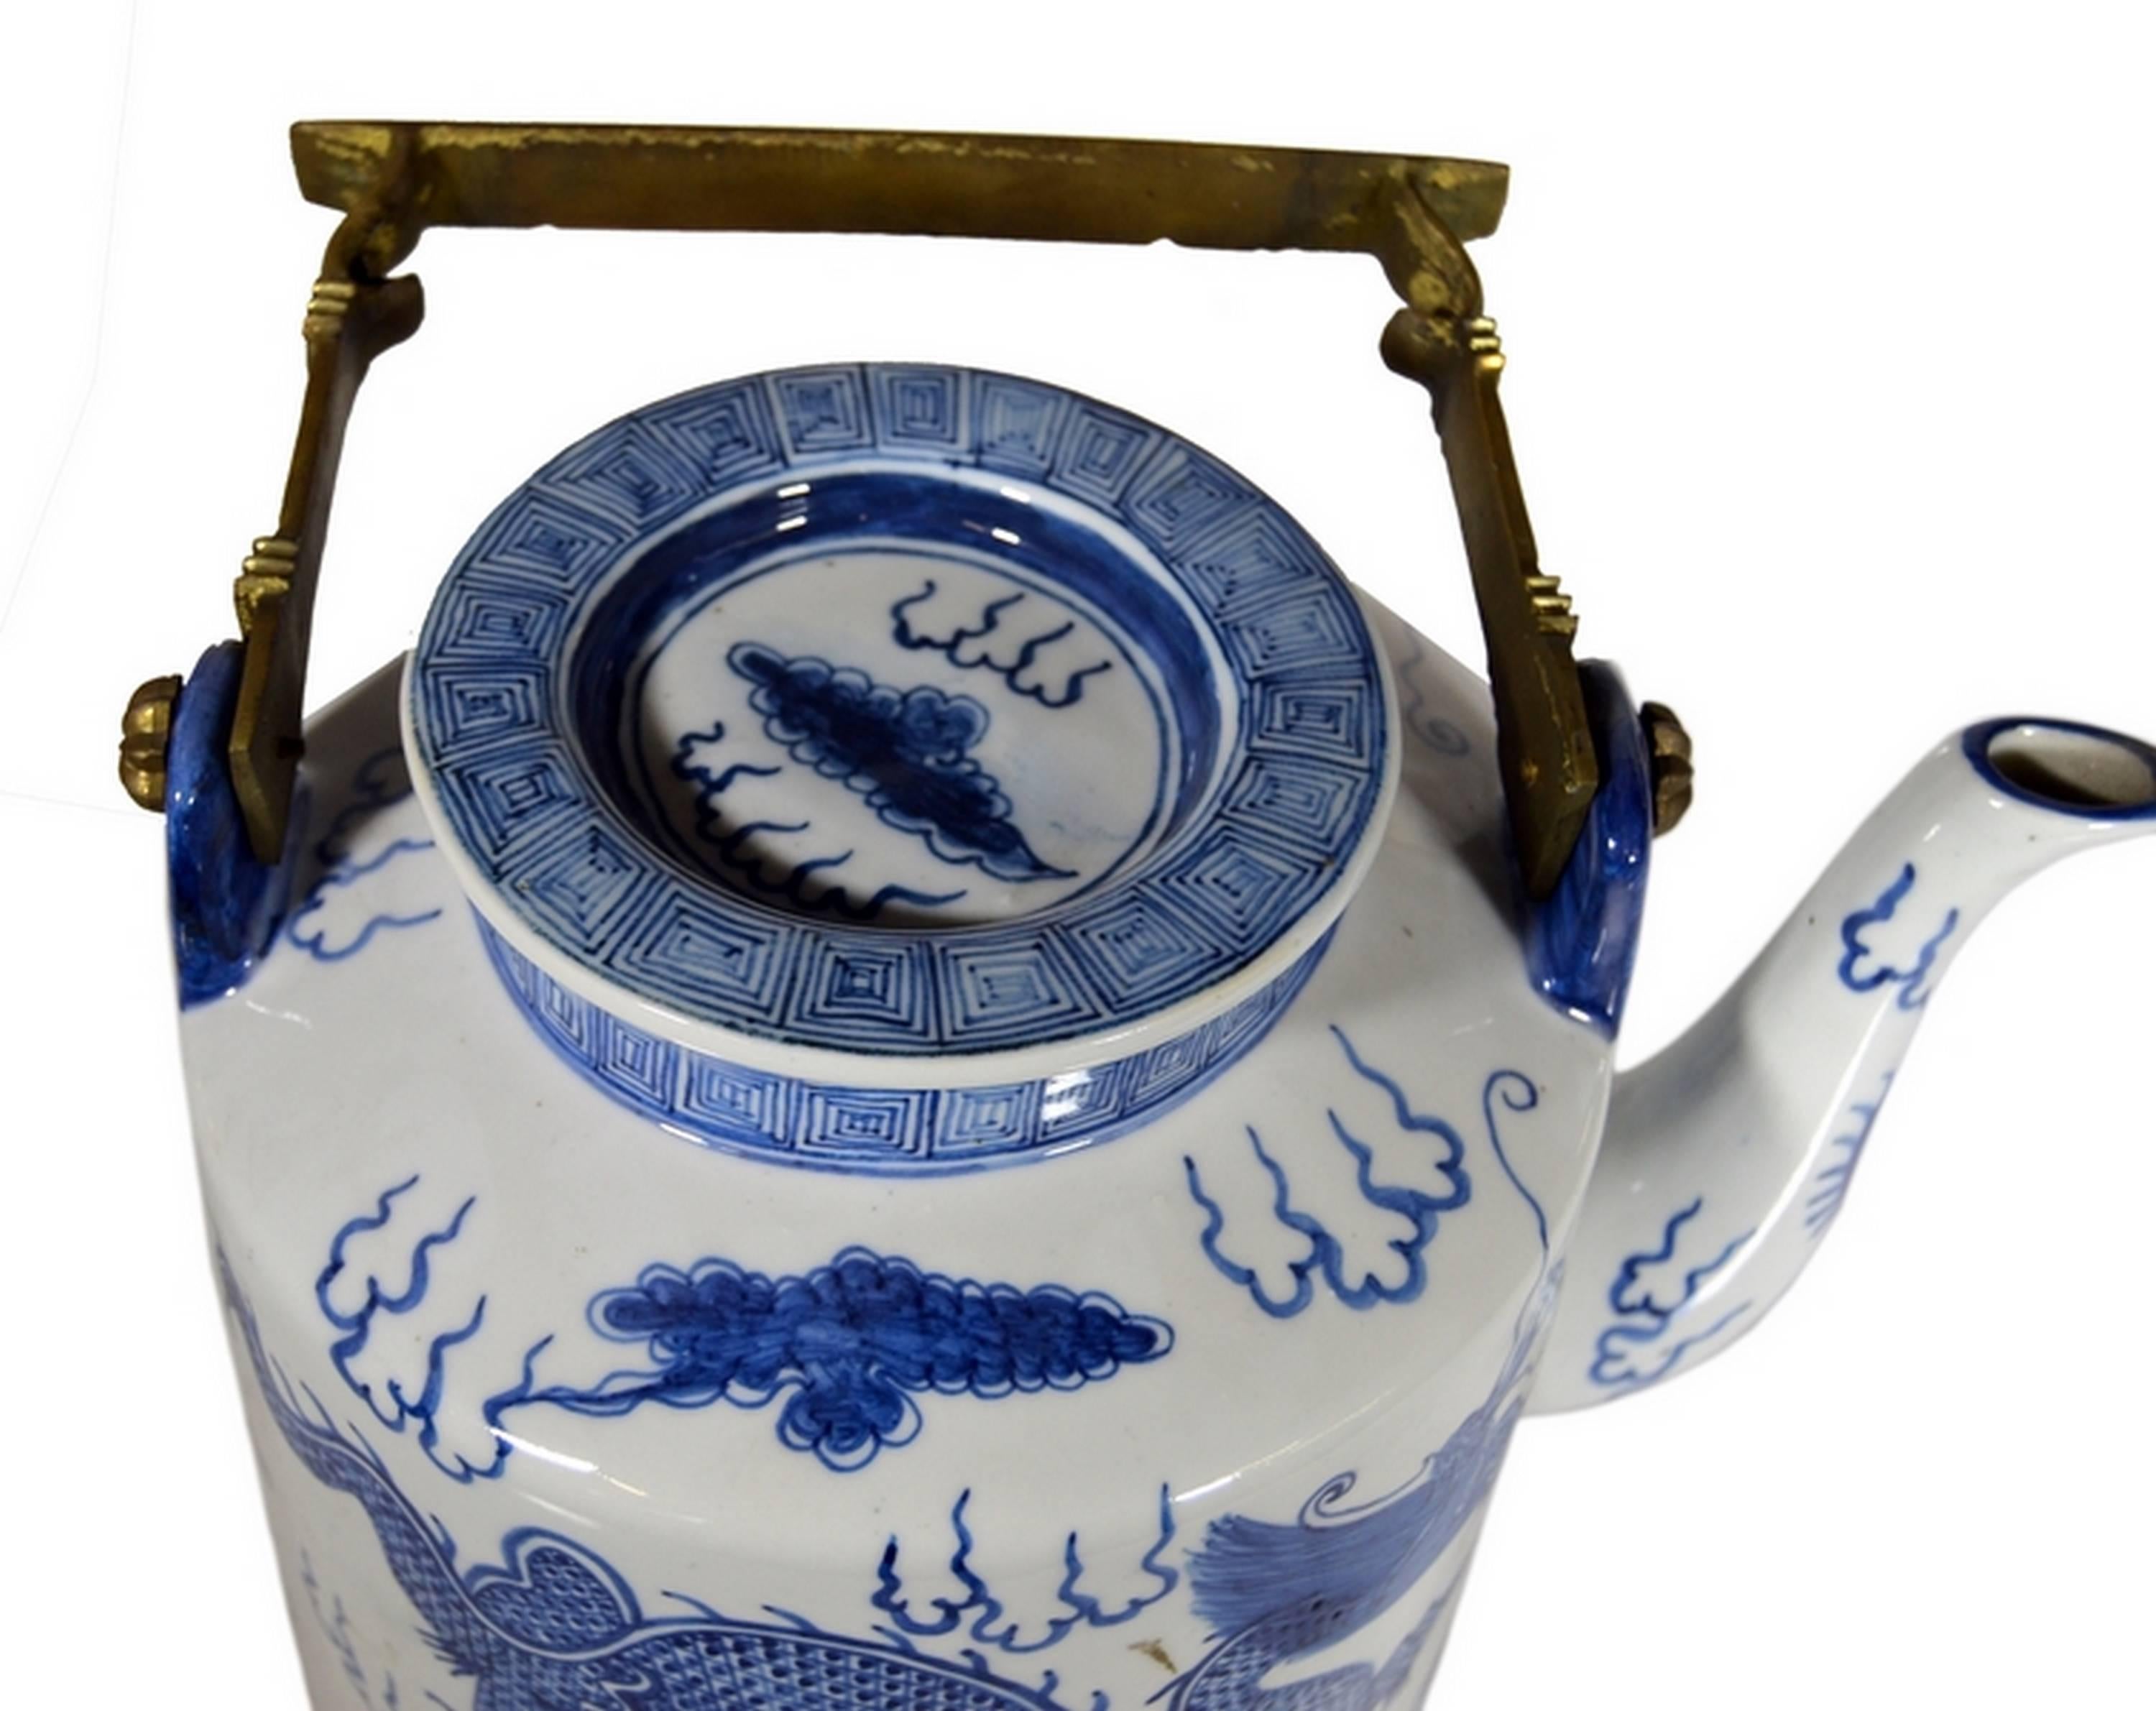 Hand-Painted  Vintage Hand Painted Blue and White Porcelain Teapot from China, circa 1930